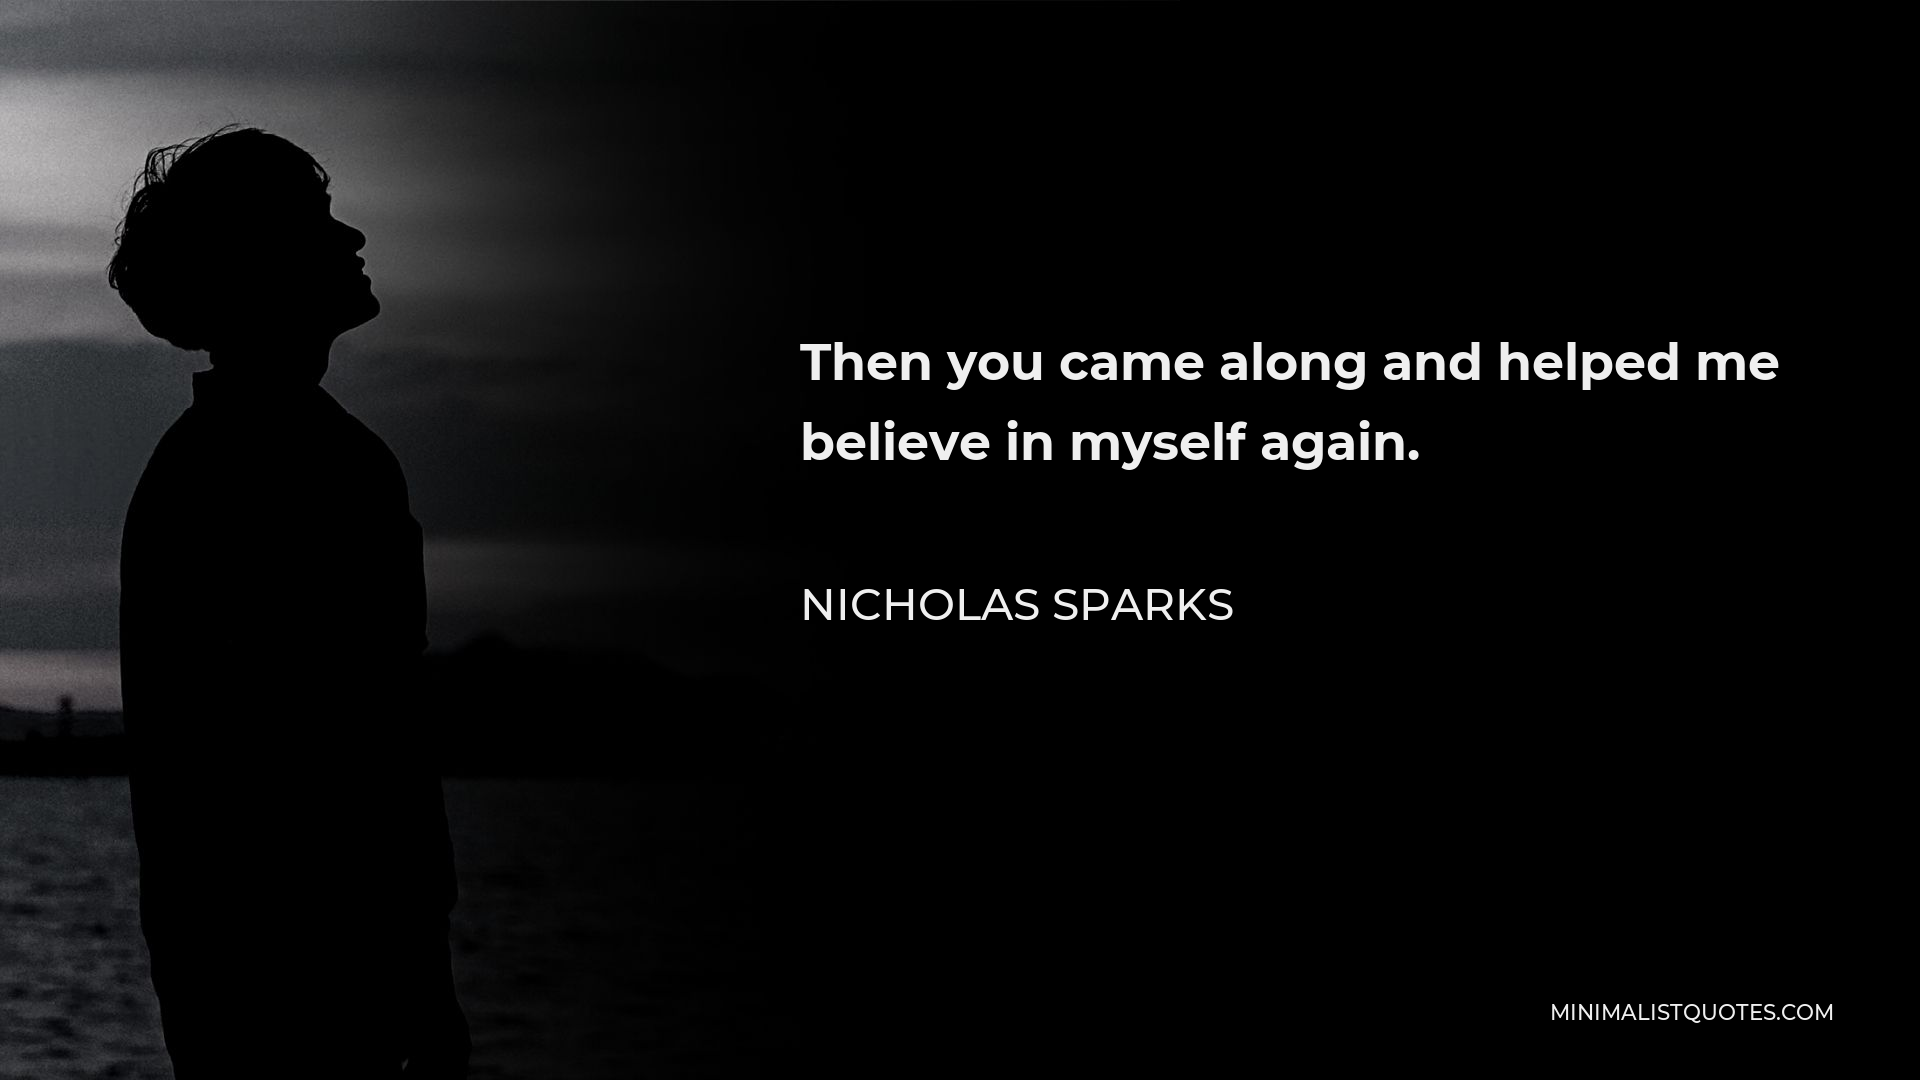 Nicholas Sparks Quote - Then you came along and helped me believe in myself again.